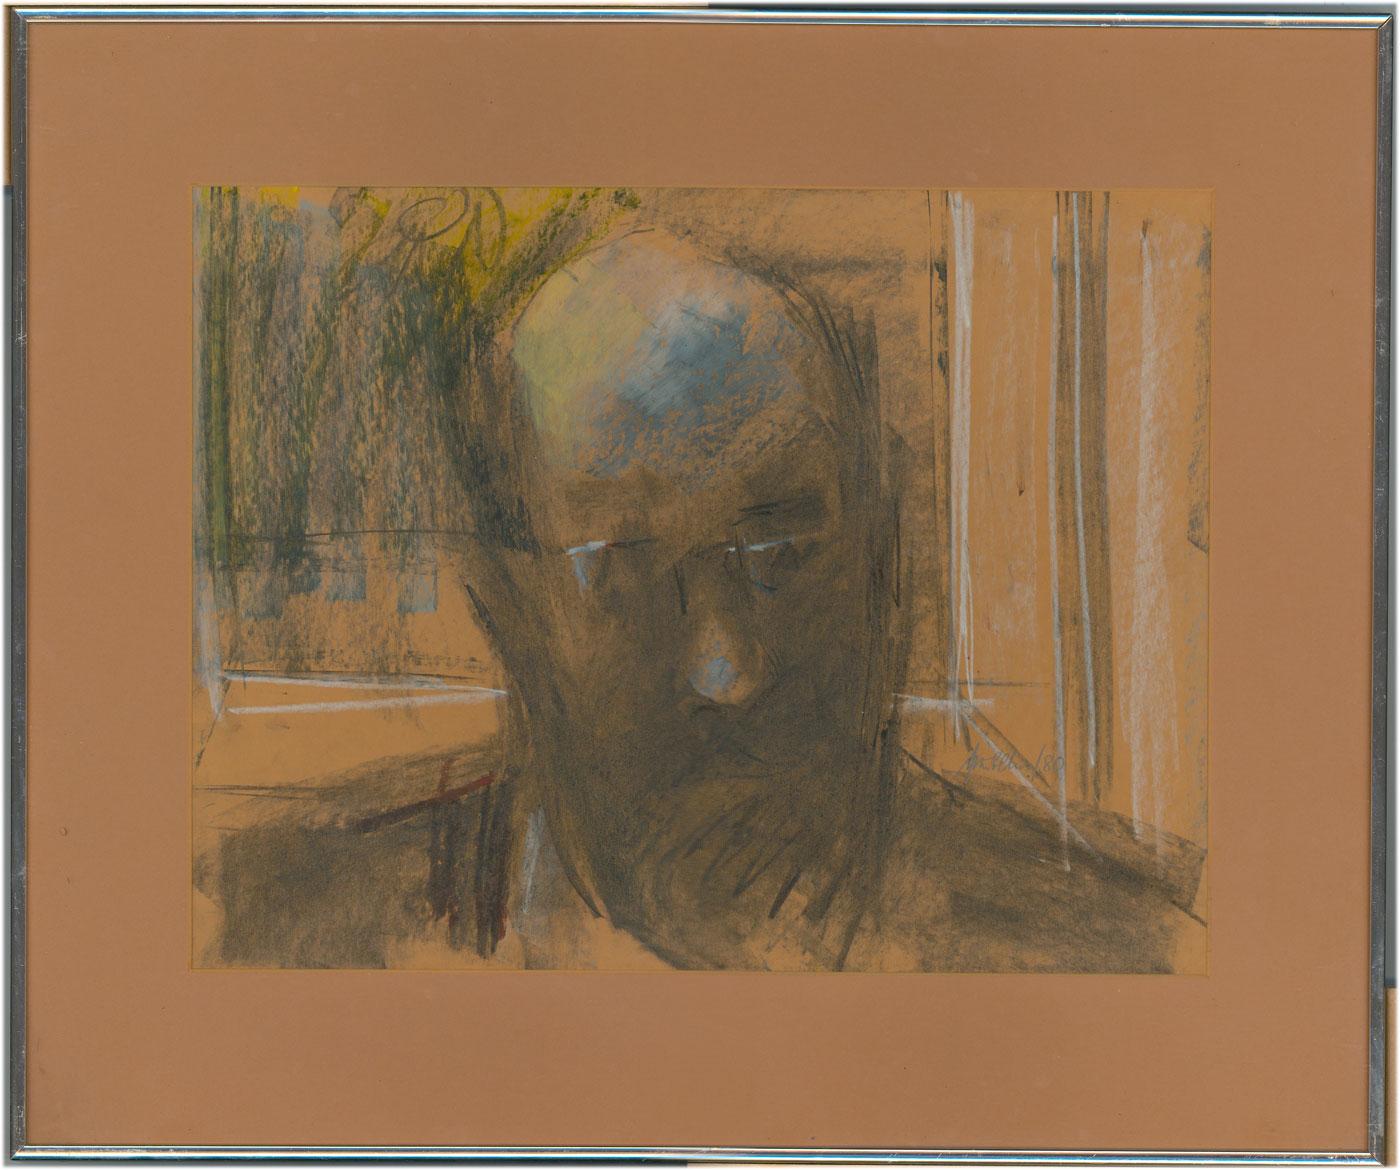 Peter Collins ARCA - Signed and Framed Original 1980 Charcoal Drawing. Portrait with pastel. Presented in a card mount and metallic frame. Signed and dated. On wove. Some wear to the frame but overall in fine condition.Peter Collins A.R.C.A